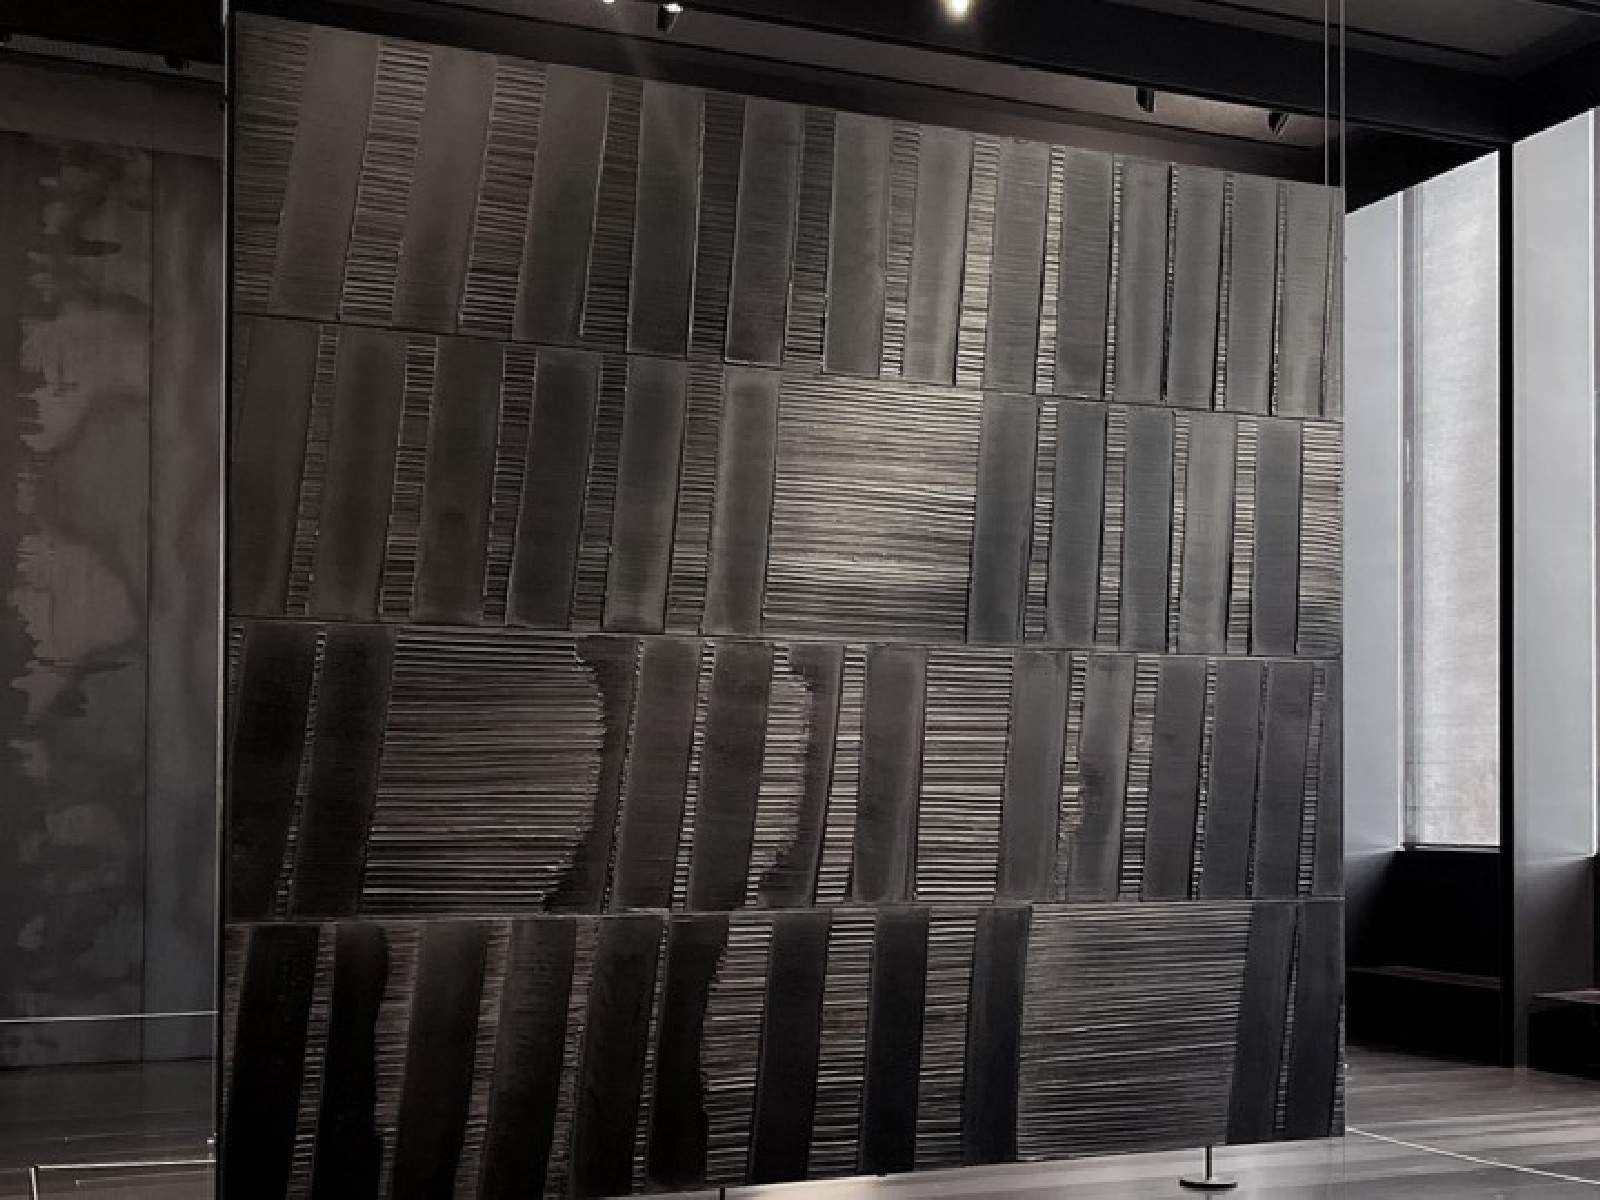 Pierre Soulages Painting Polyptyque I